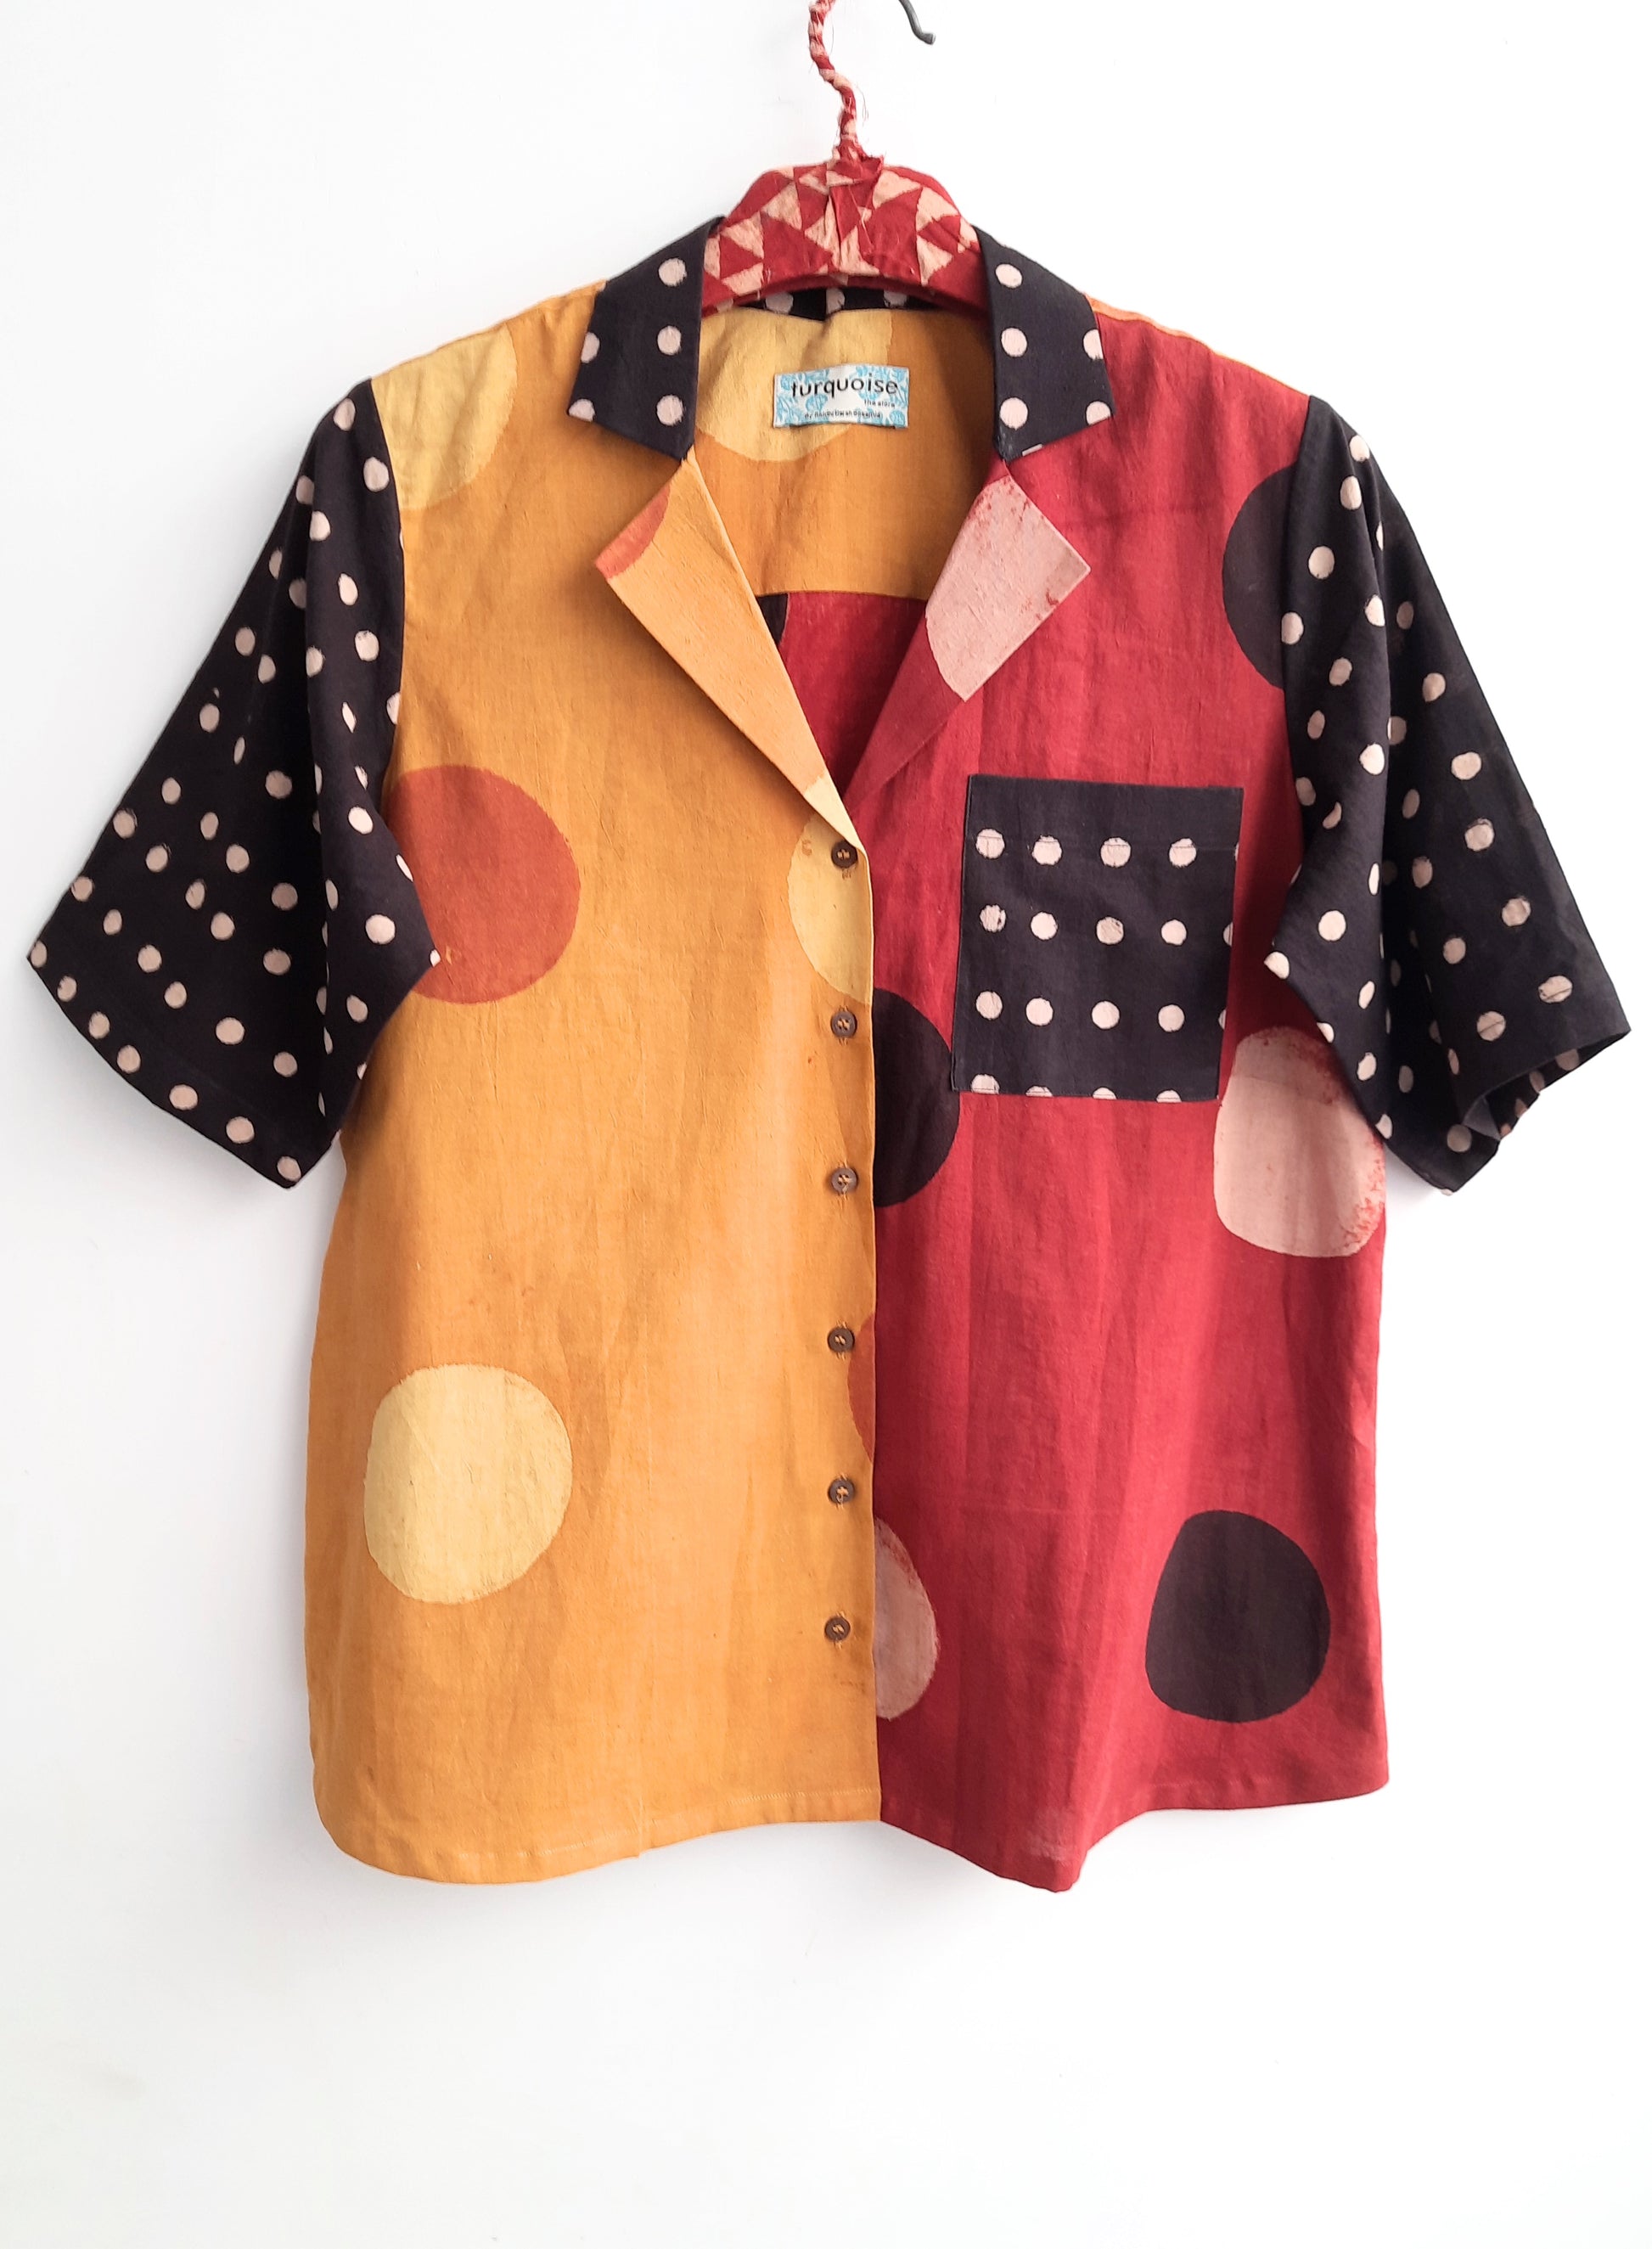 Multi polka dots shirt for her, Slow fashion